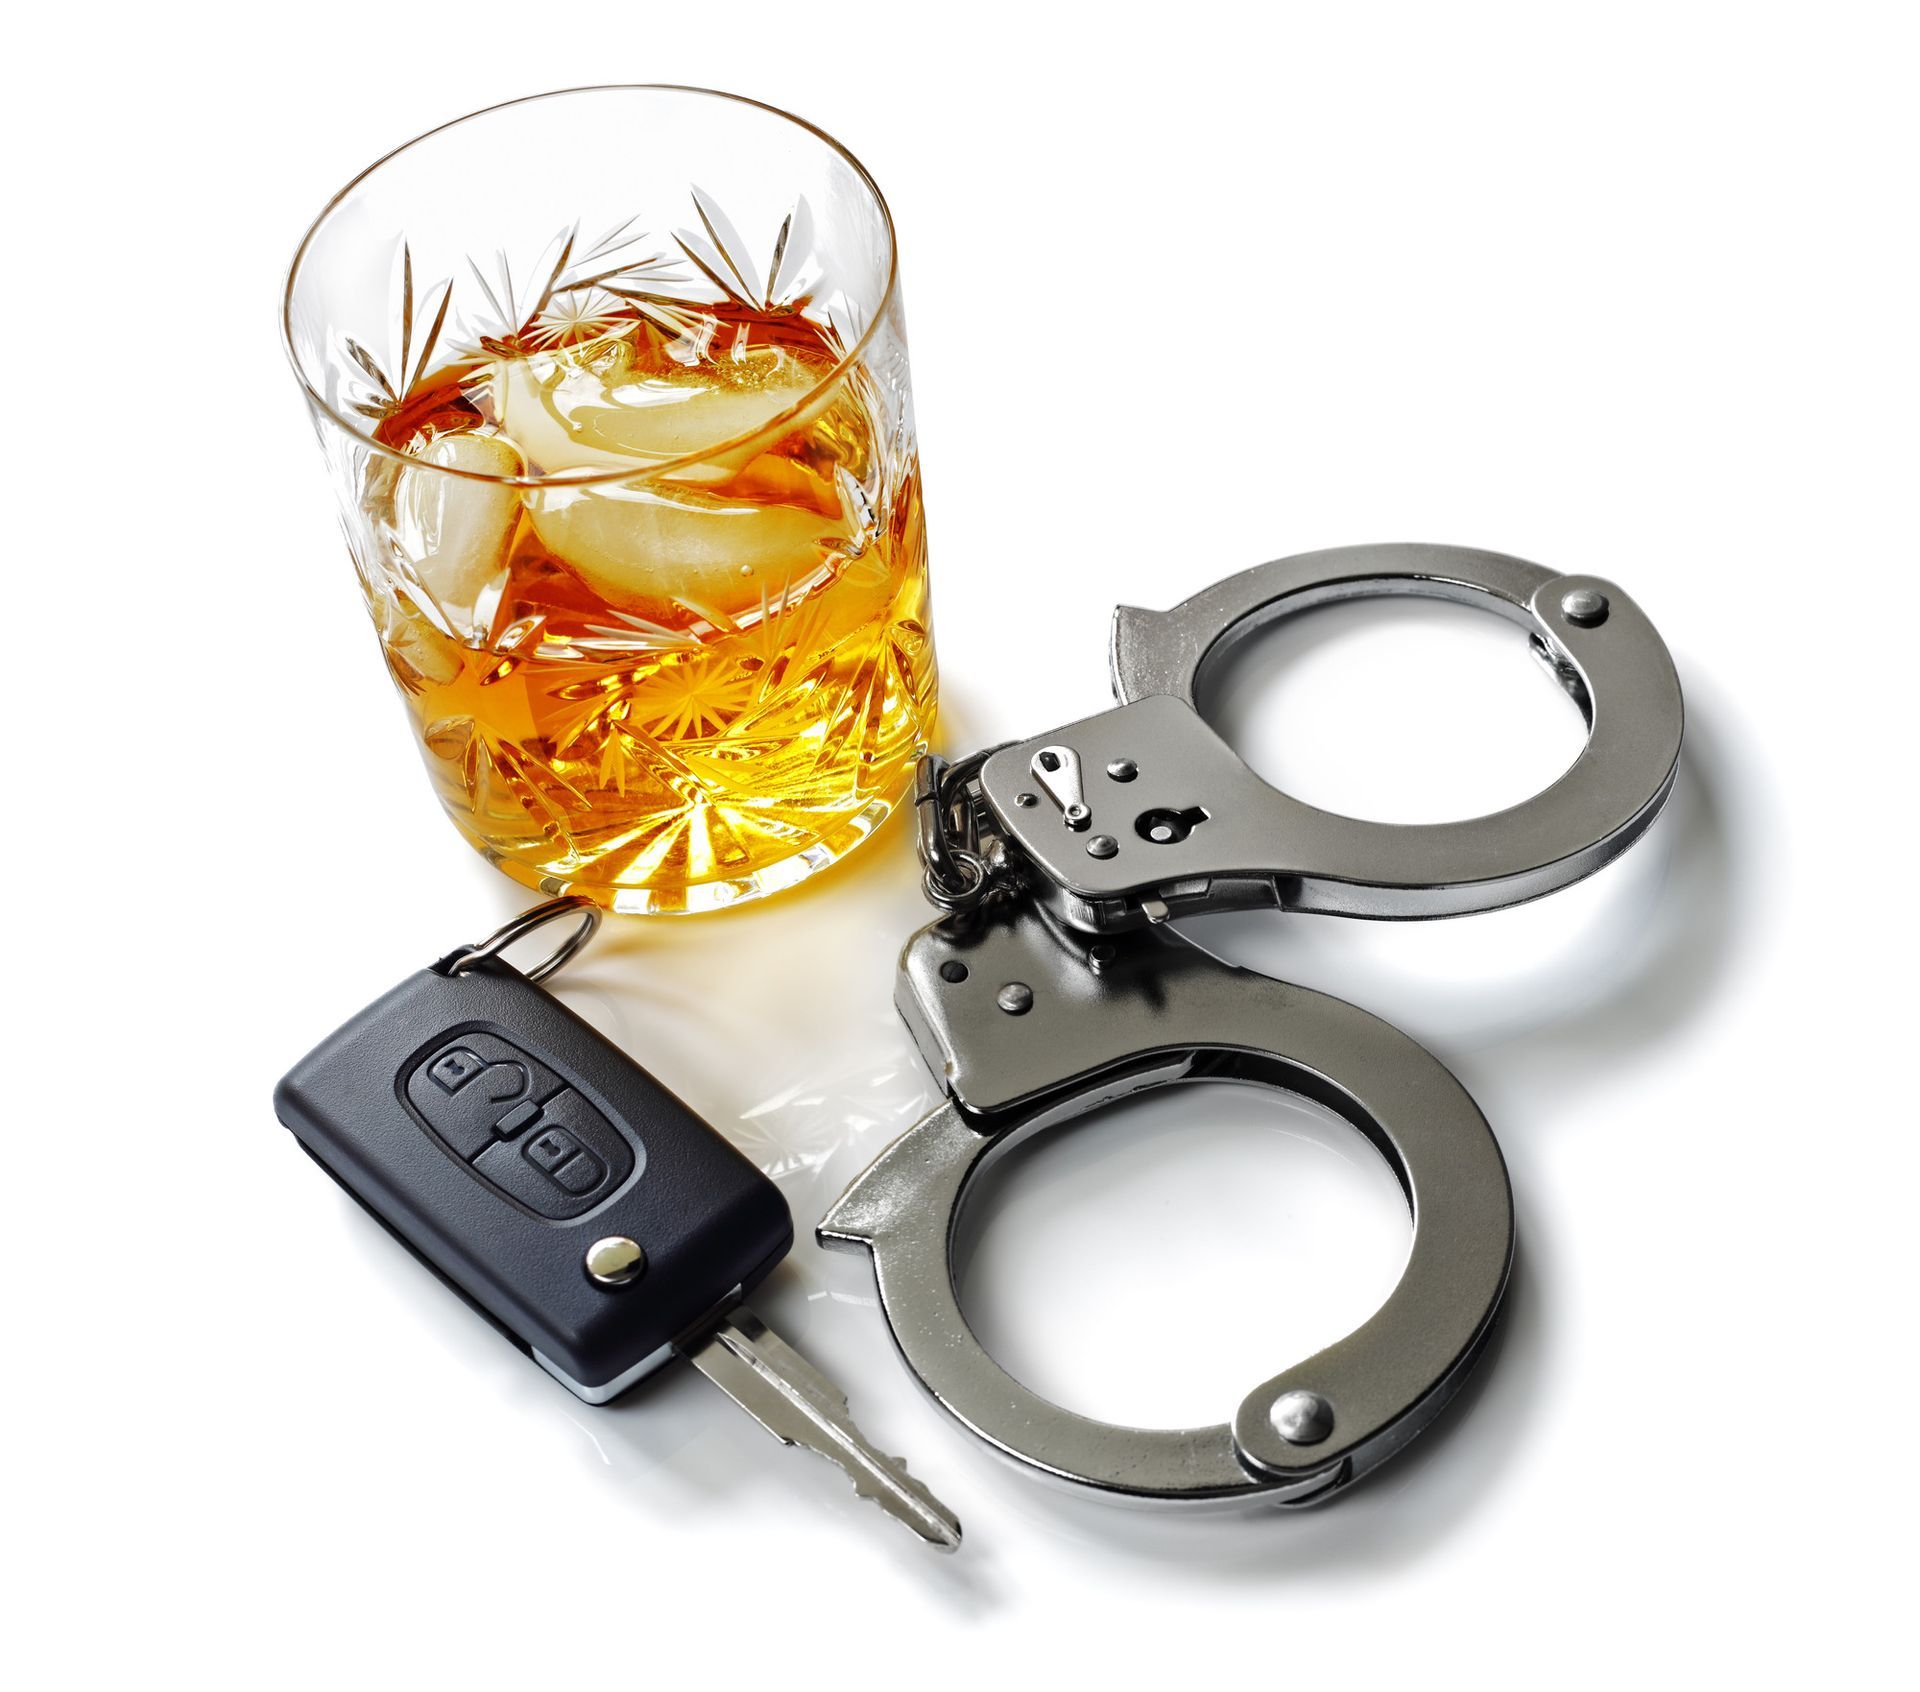 a pair of handcuffs next to a car key and a glass of alcohol